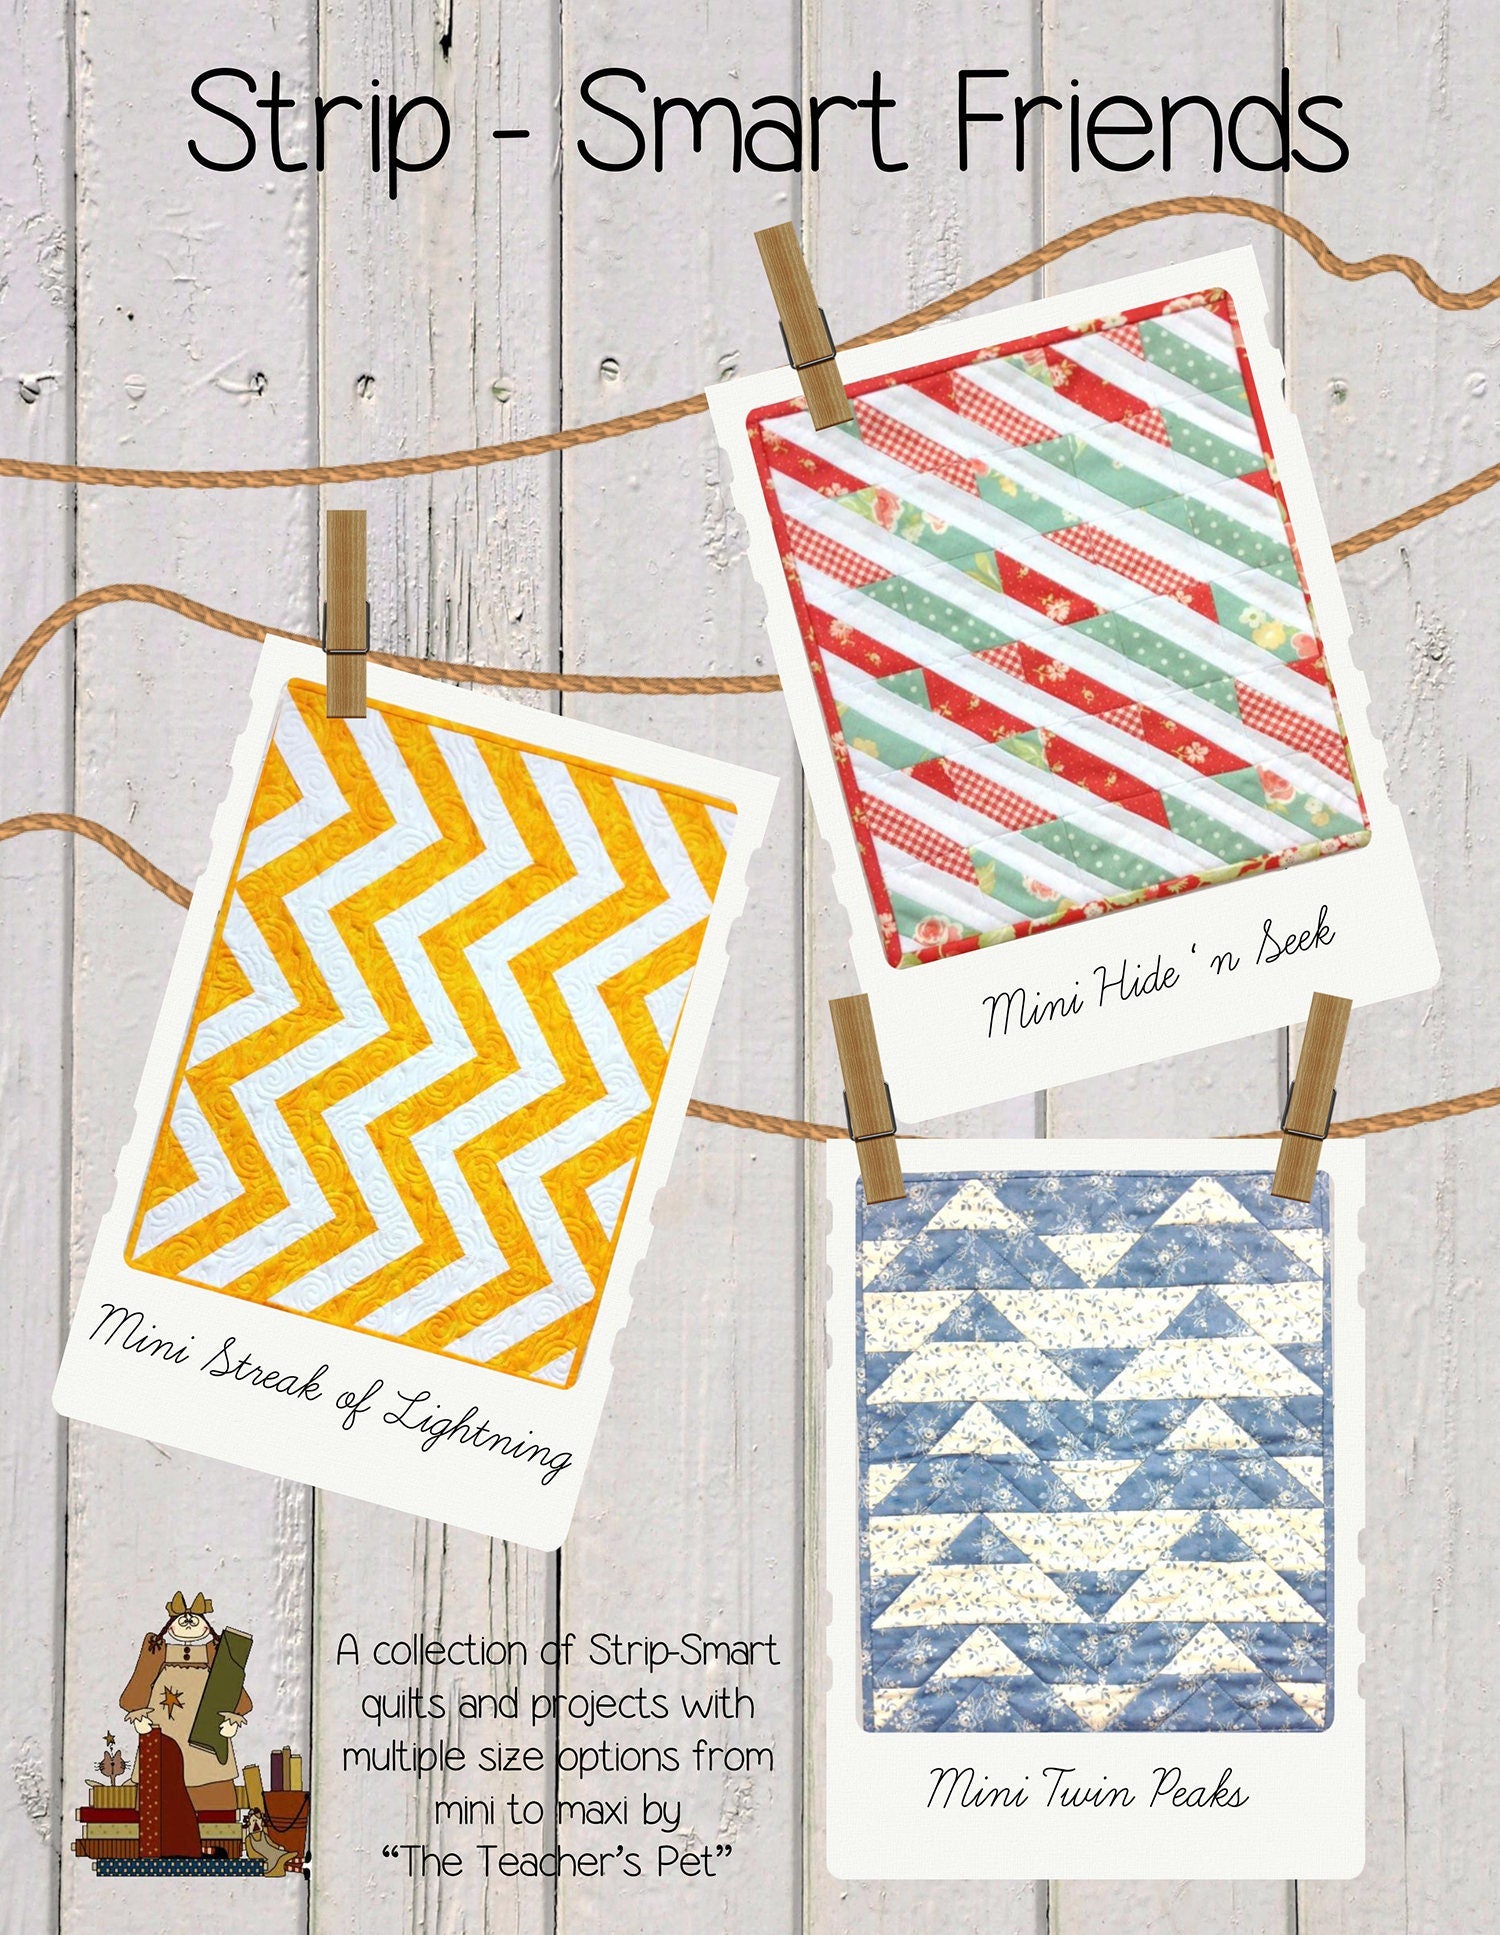 Strip-Smart Friends Quilt Pattern Book by Kathy Brown for The Teacher's Pet